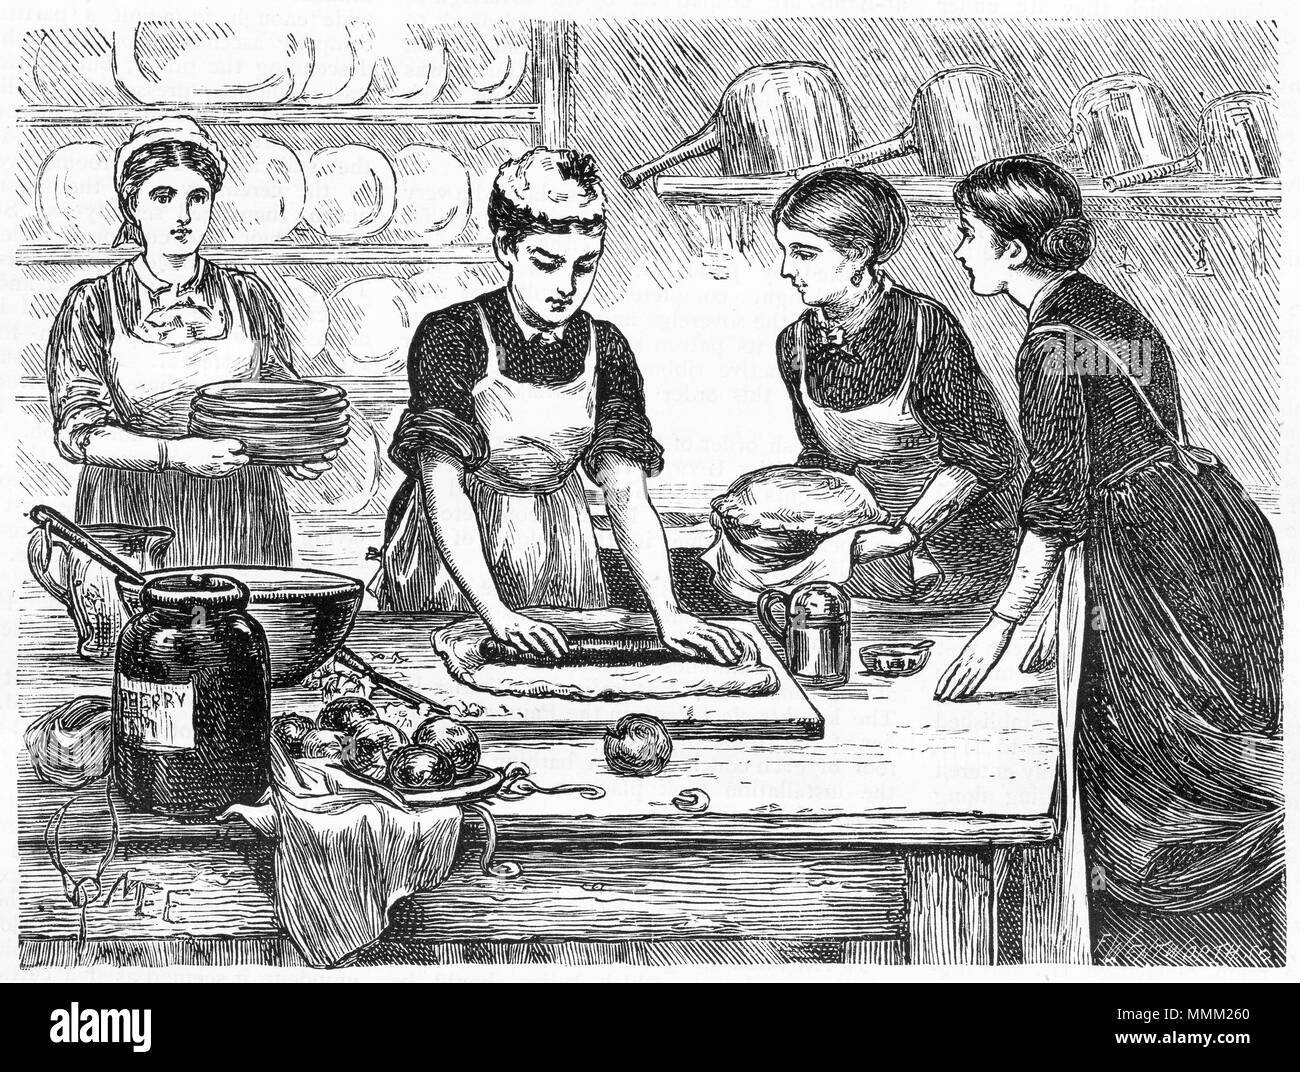 Engraving of a team of women at work in the Victorian kitchen. From an original engraving in the Girl's Own Paper magazine 1883. Stock Photo